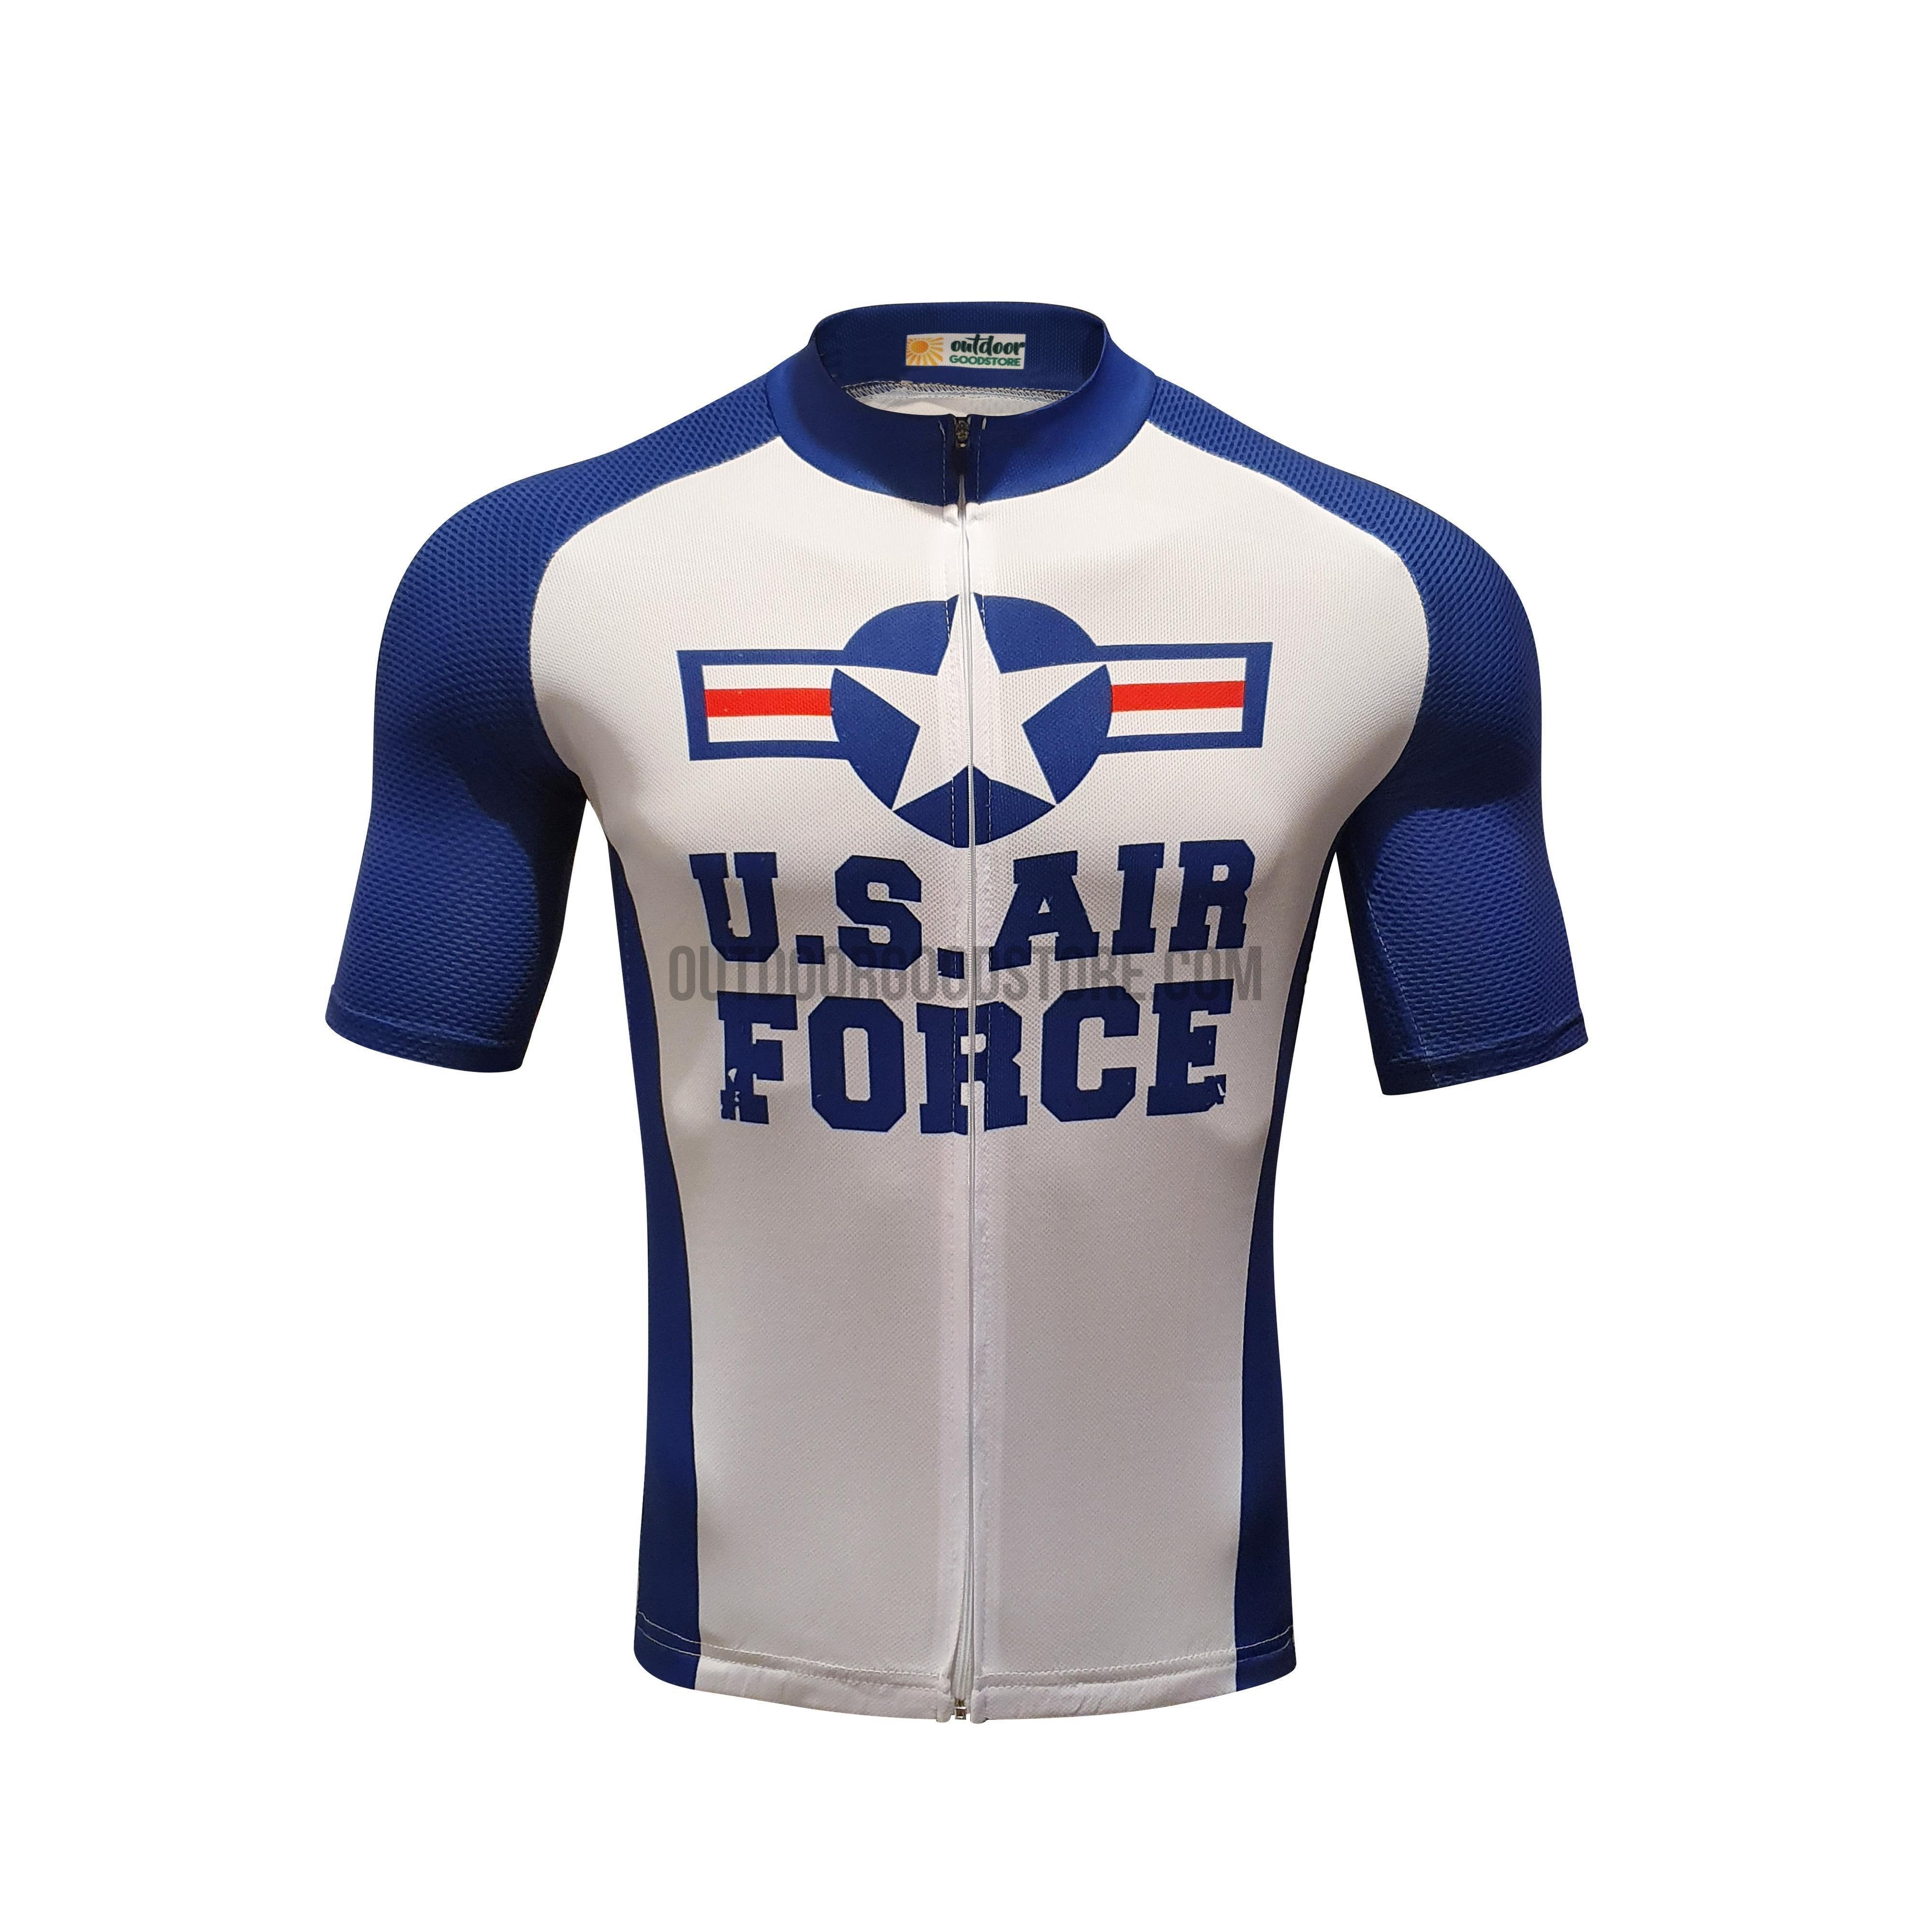 OTW Cycling Jersey, Made in the USA